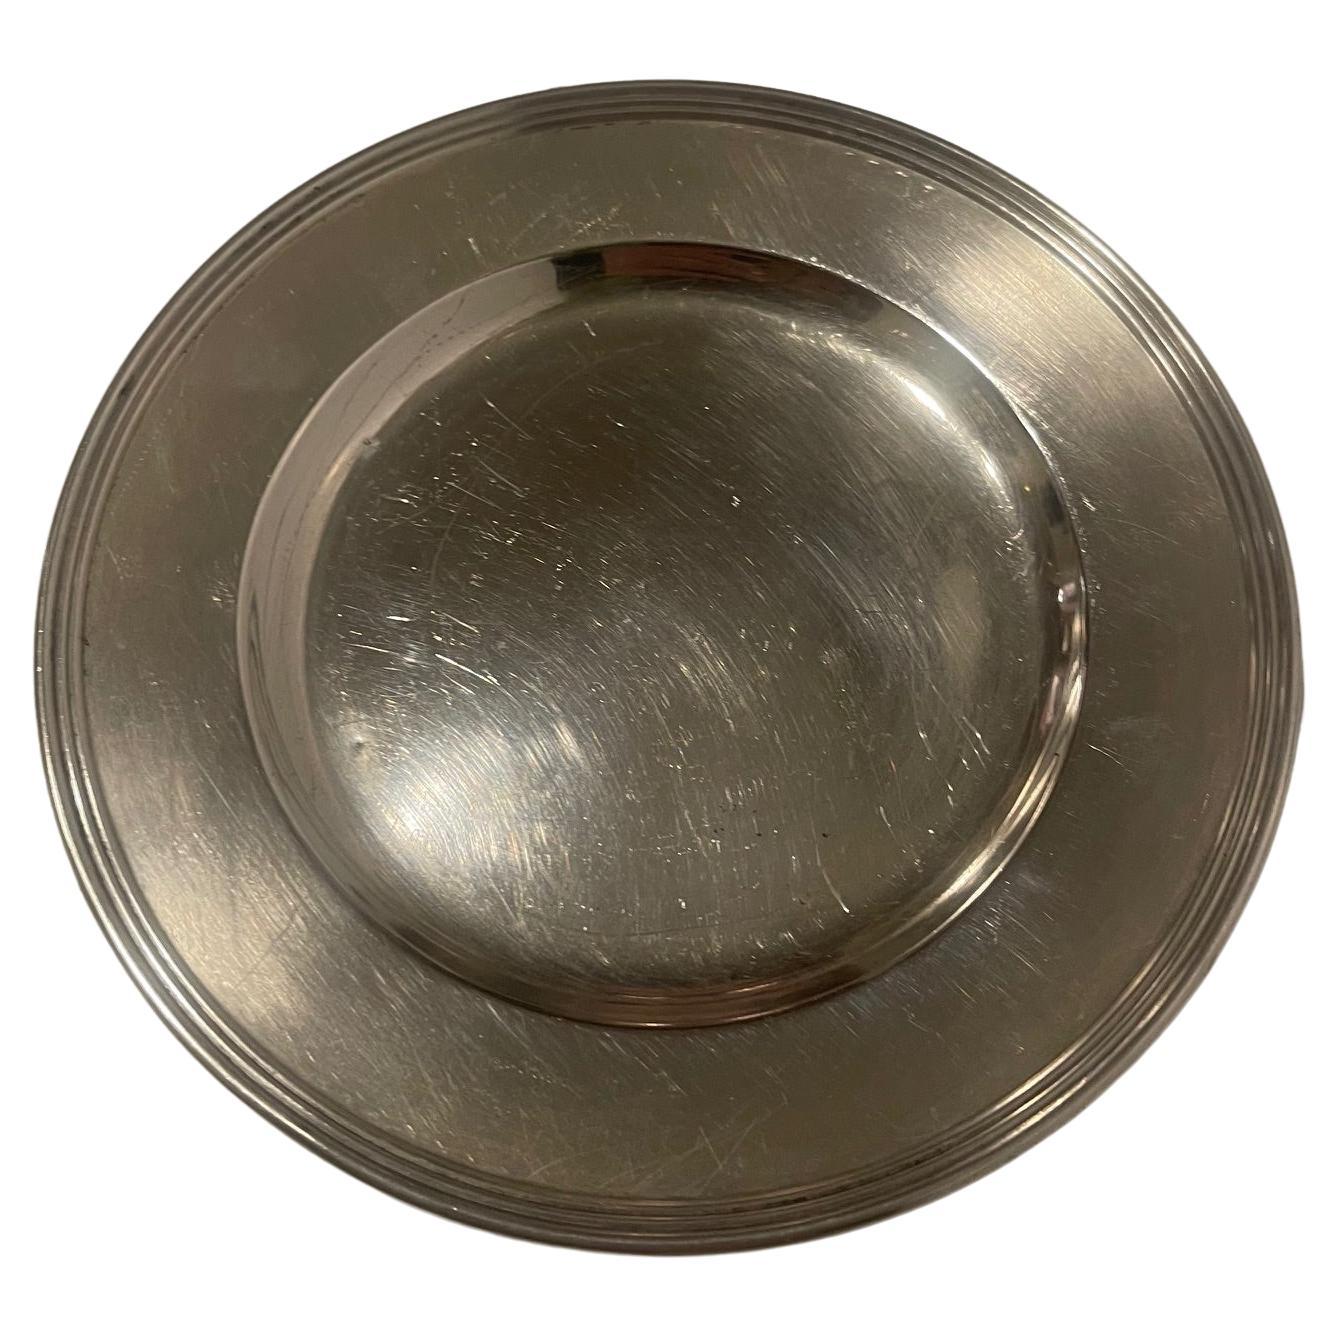 Hammered Sterling Silver Salver Tray Plate, Early 20th Century For Sale